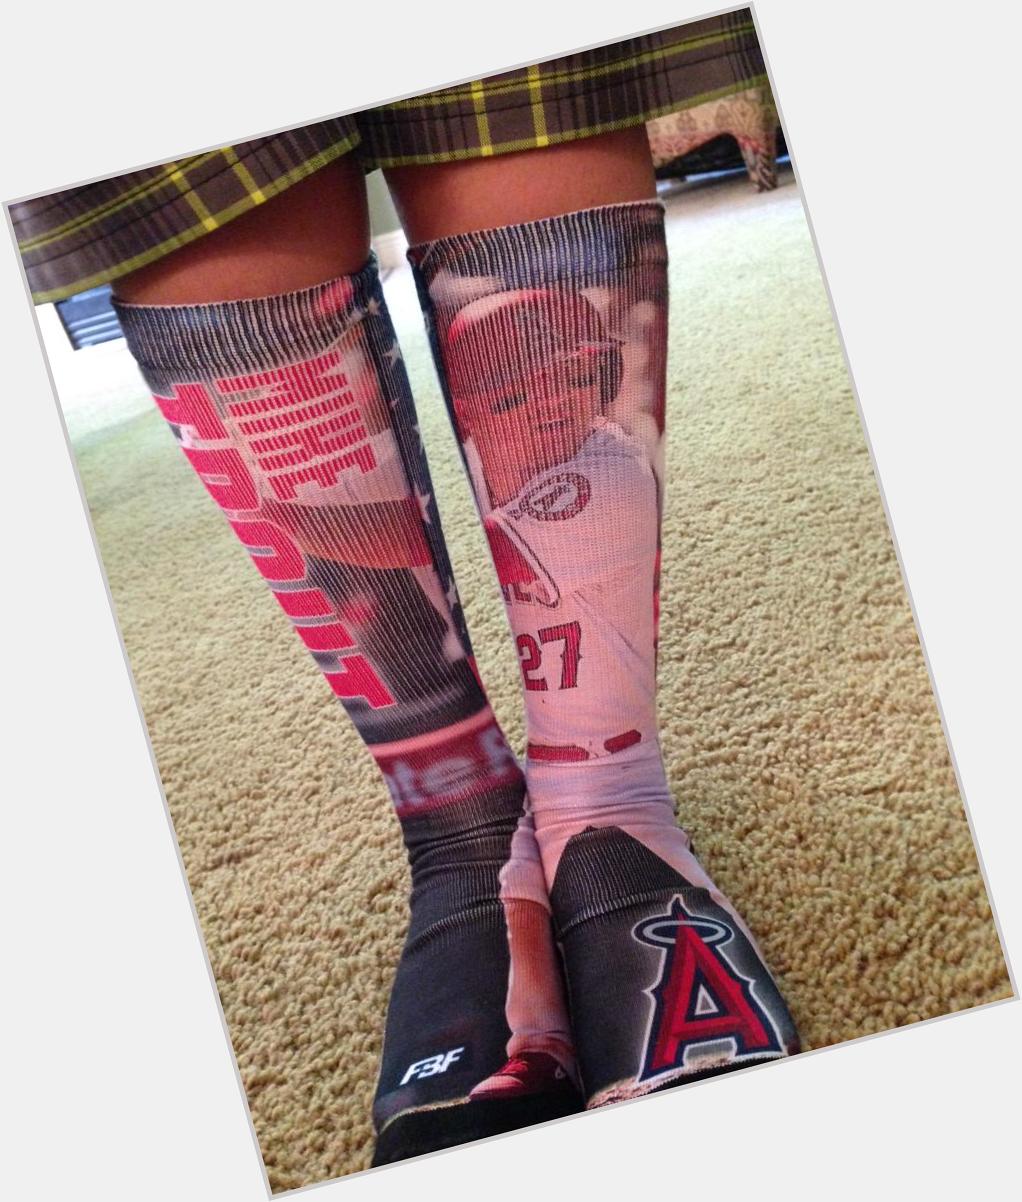  Happy 9th Birthday to a great son. Looking good in his new Mike Trout socks. 